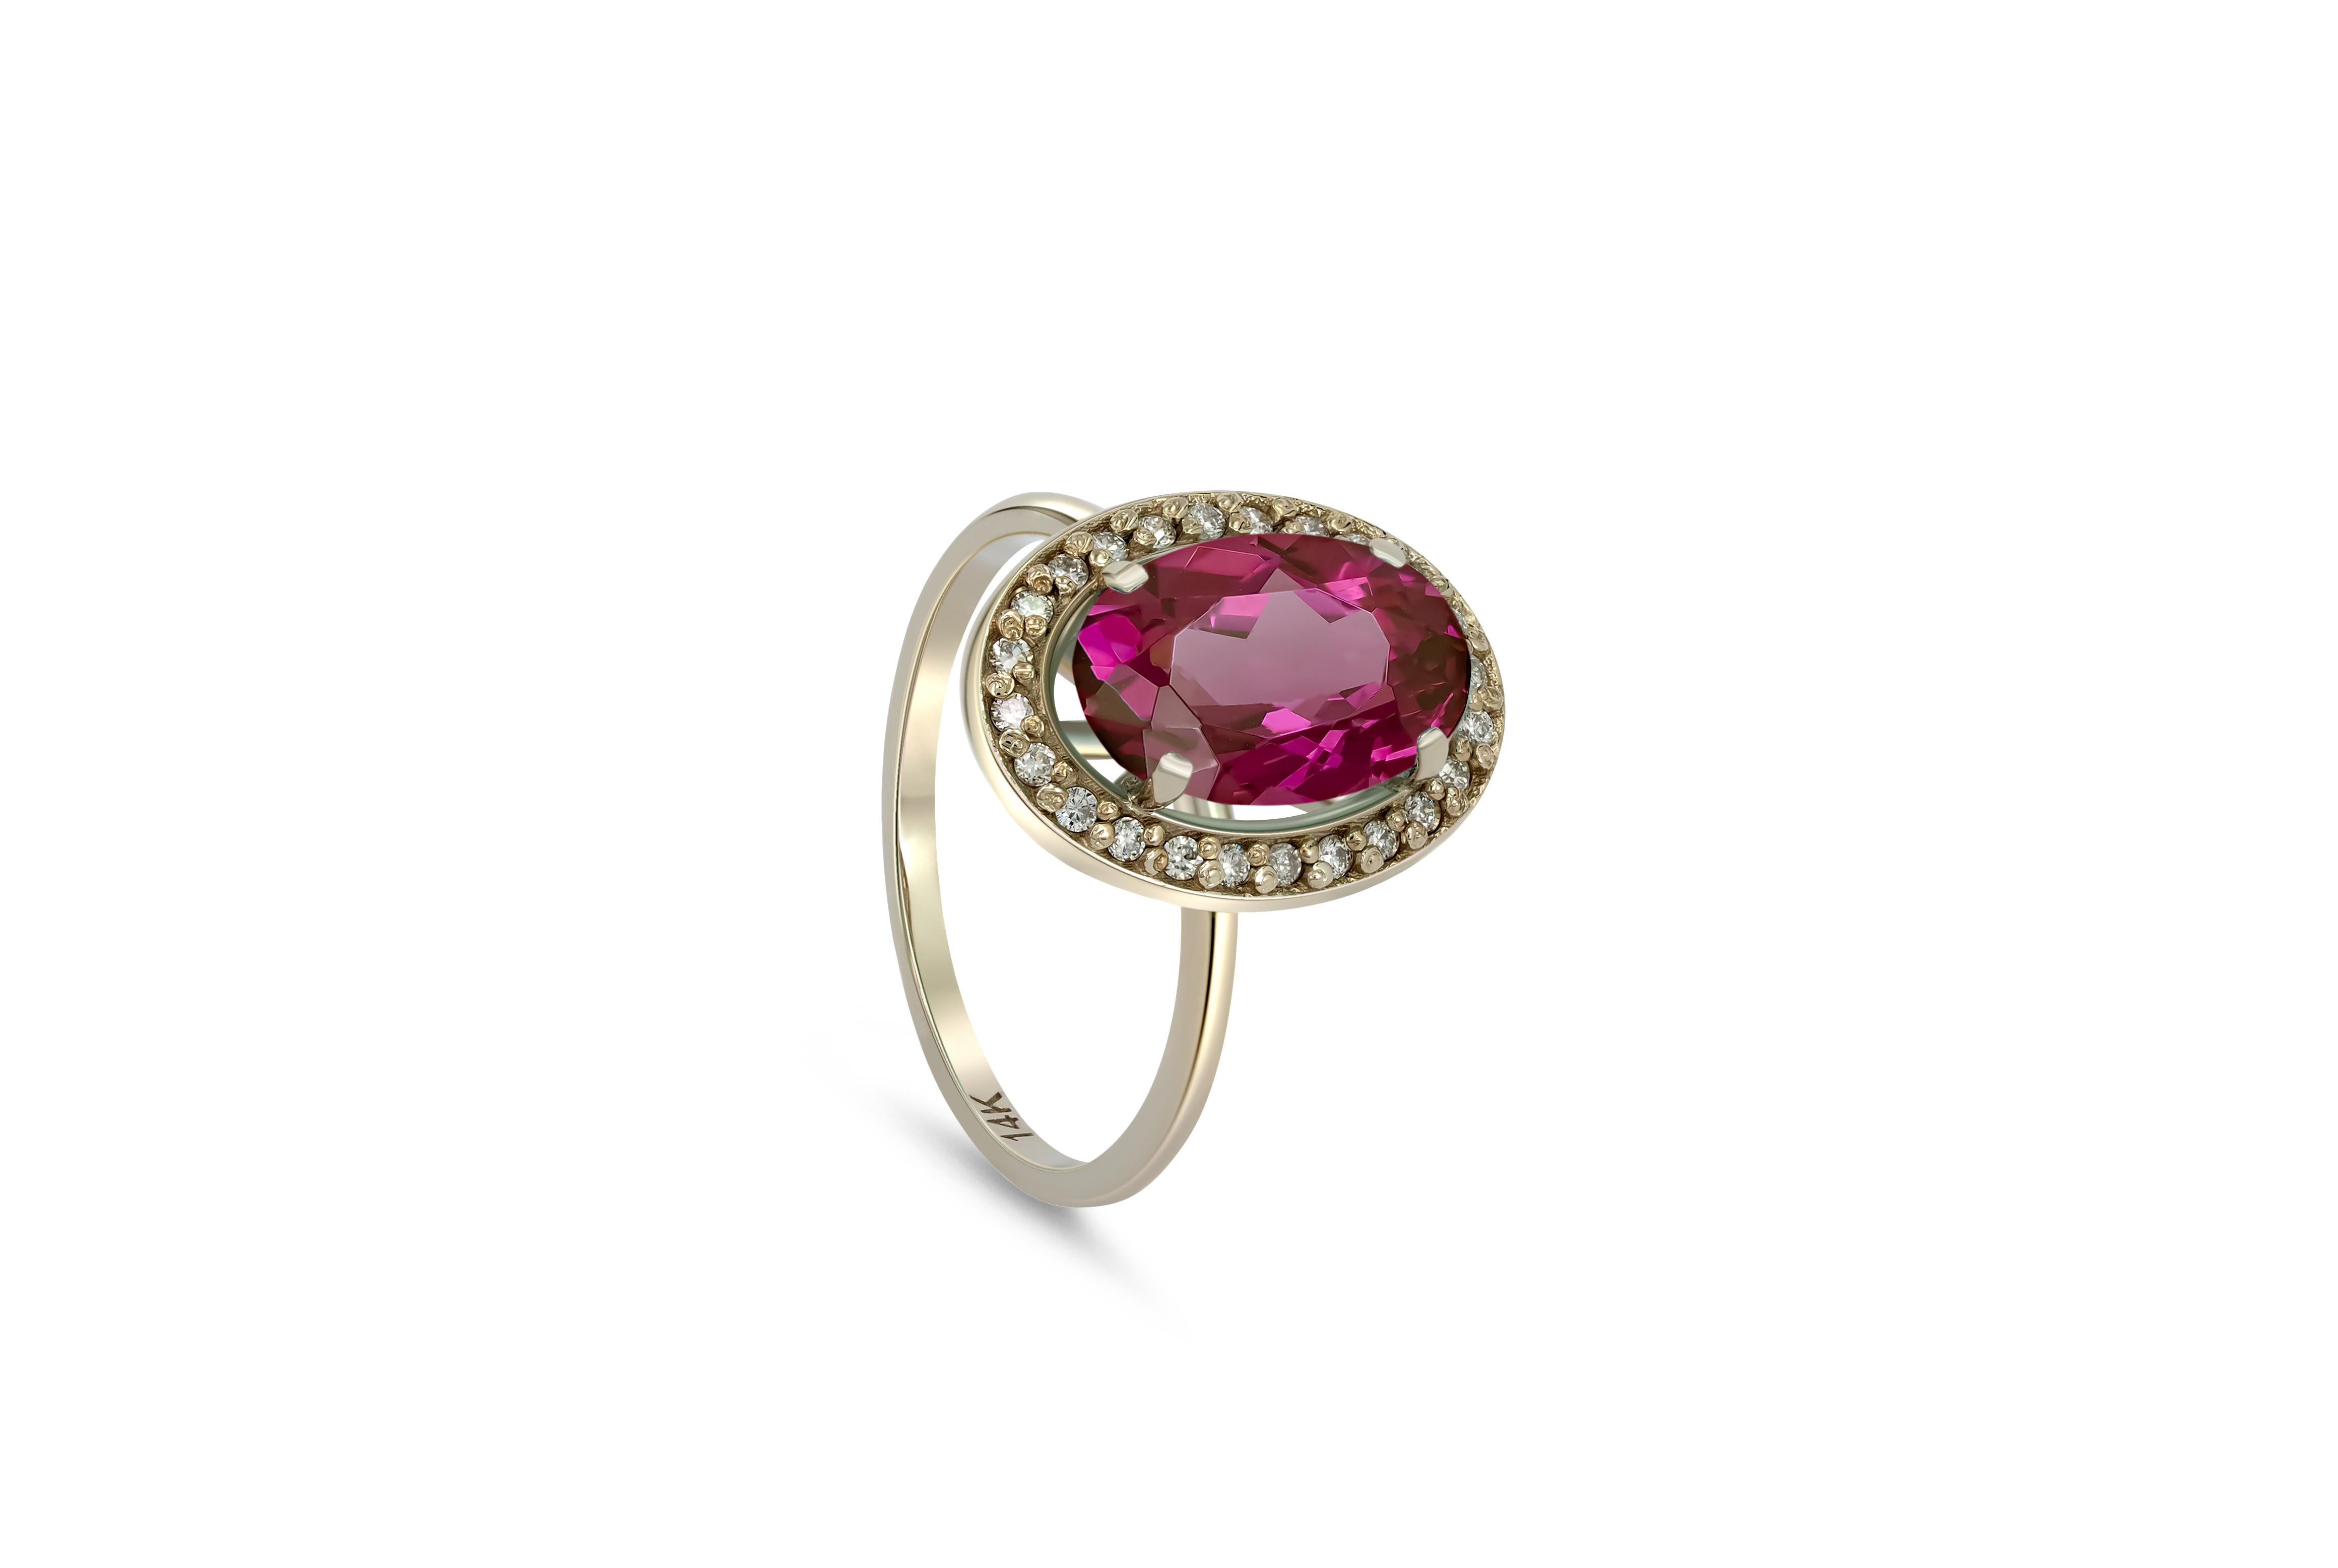 Ruby and diamonds 14k gold ring. 
Oval Ruby gold ring.  Ruby diamond halo ring. Pink gemstone ring. July birthstone ring.

Metal: 14k gold
Weight: 3 gr depends from size

Gemstones:
Ruby - 1 piece
Cut - oval
Color - pink
Weight - 3-3.2 ct

Side